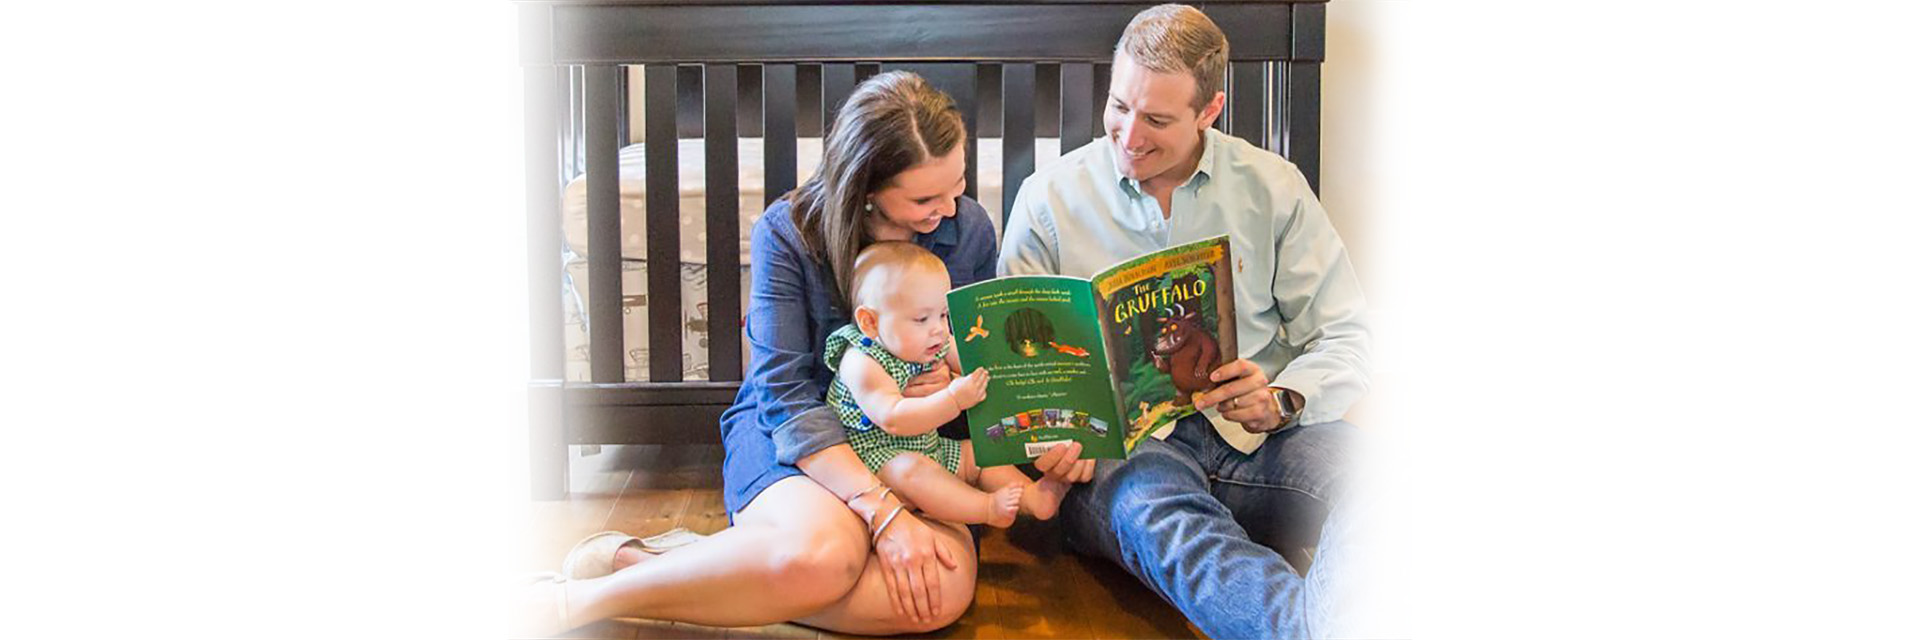 New parents reading books to an infant on the floor